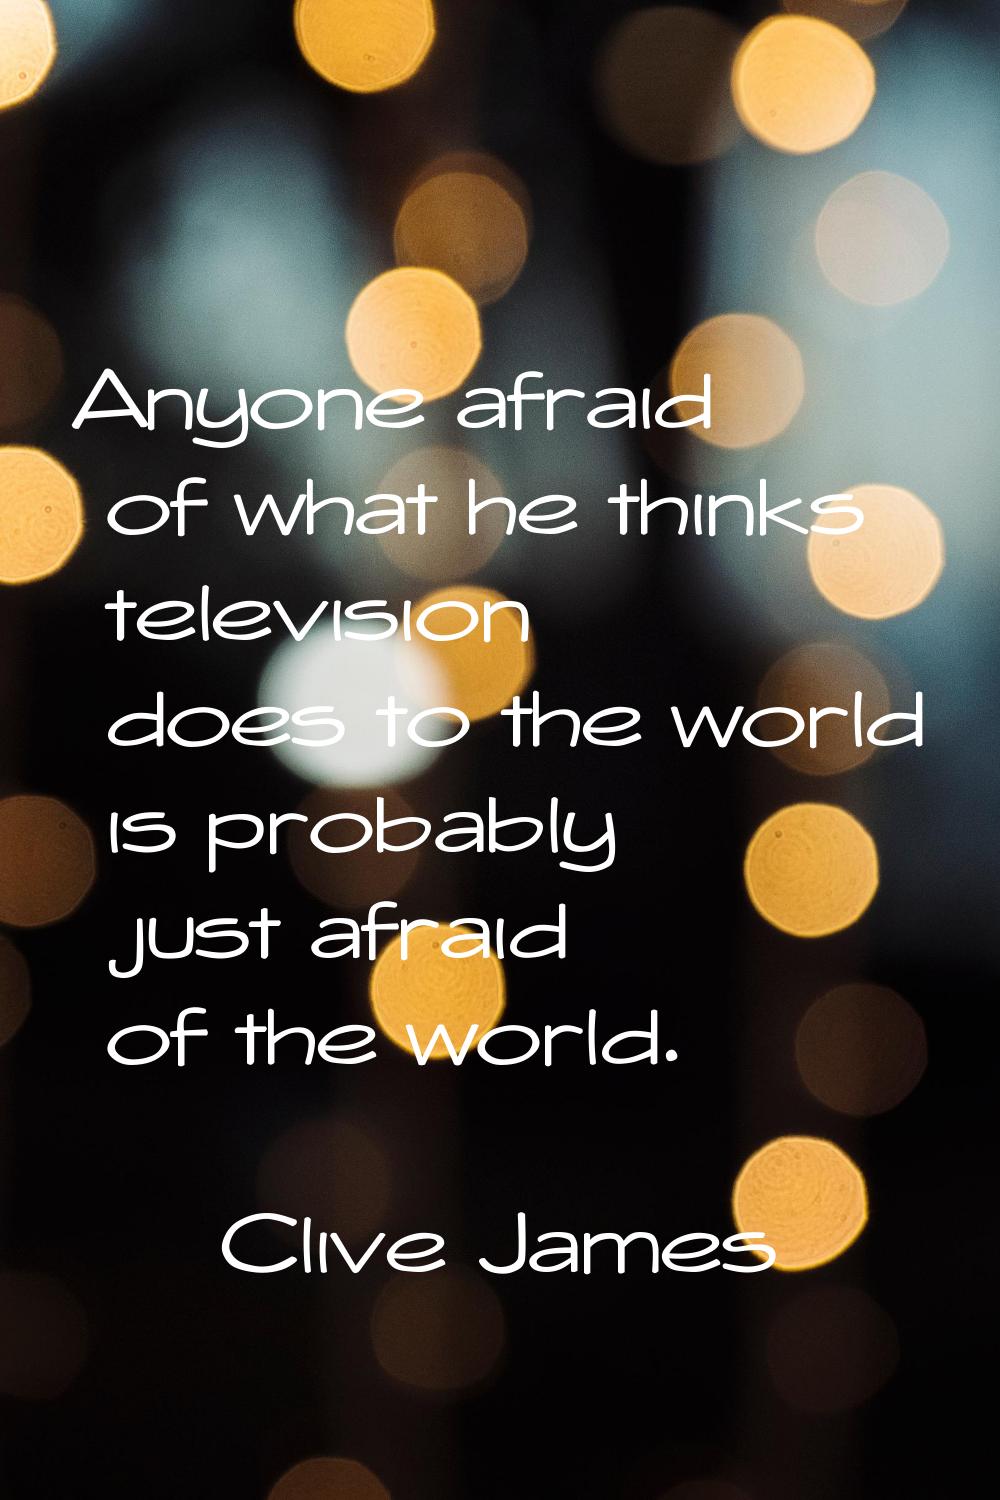 Anyone afraid of what he thinks television does to the world is probably just afraid of the world.